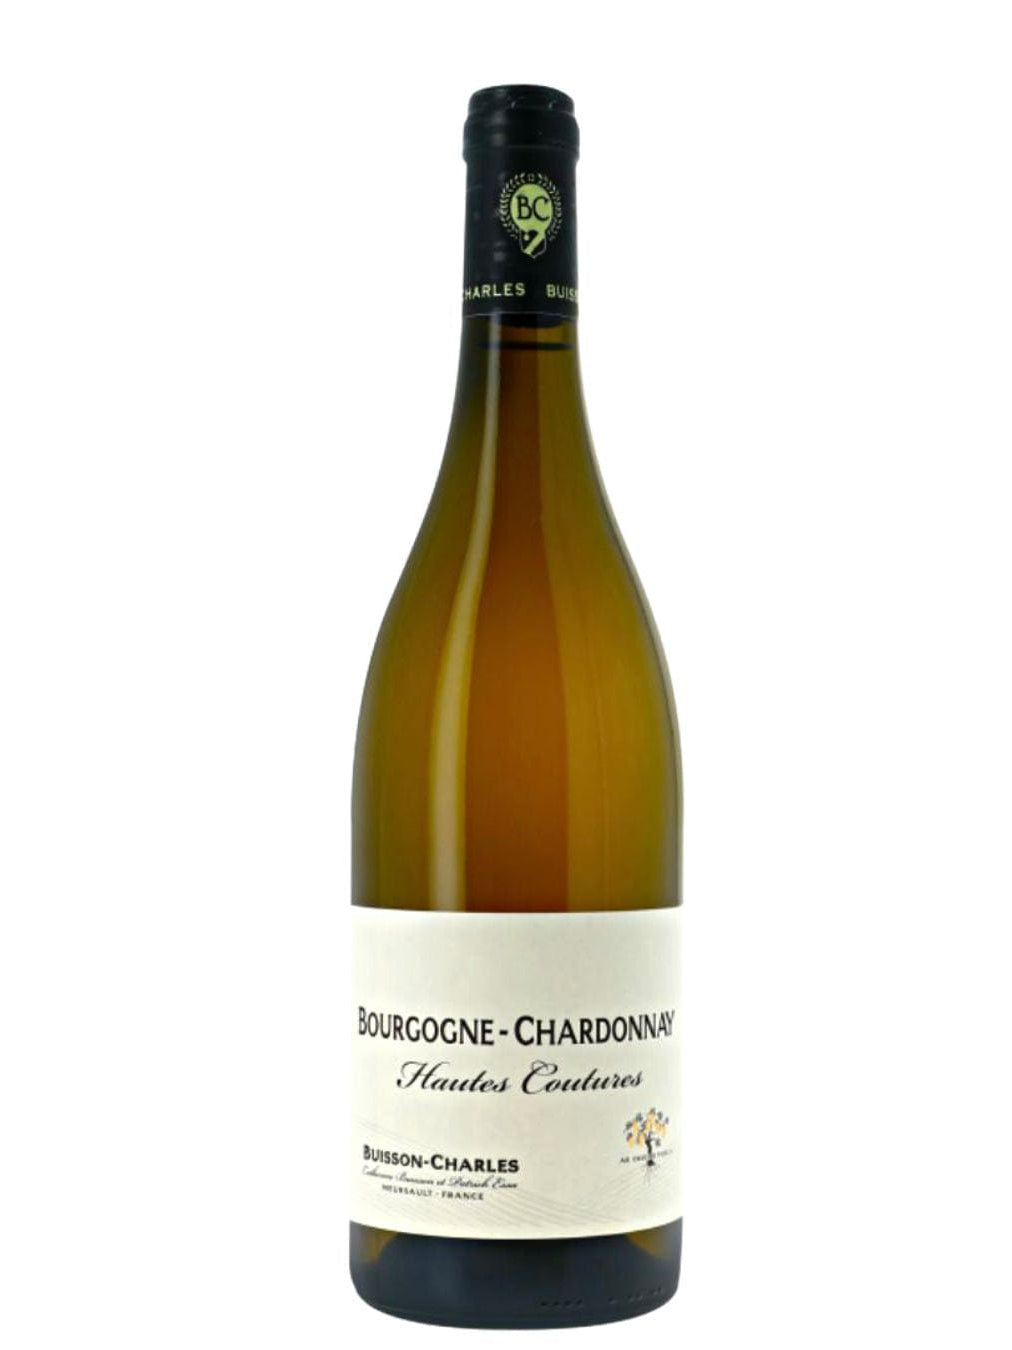 Shop Domaine Buisson-Charles Domaine Buisson-Charles Bourgogne Chardonnay Hautes Coutures 2019 online at PENTICTON artisanal French wine store in Hong Kong. Discover other French wines, promotions, workshops and featured offers at pentictonpacific.com 